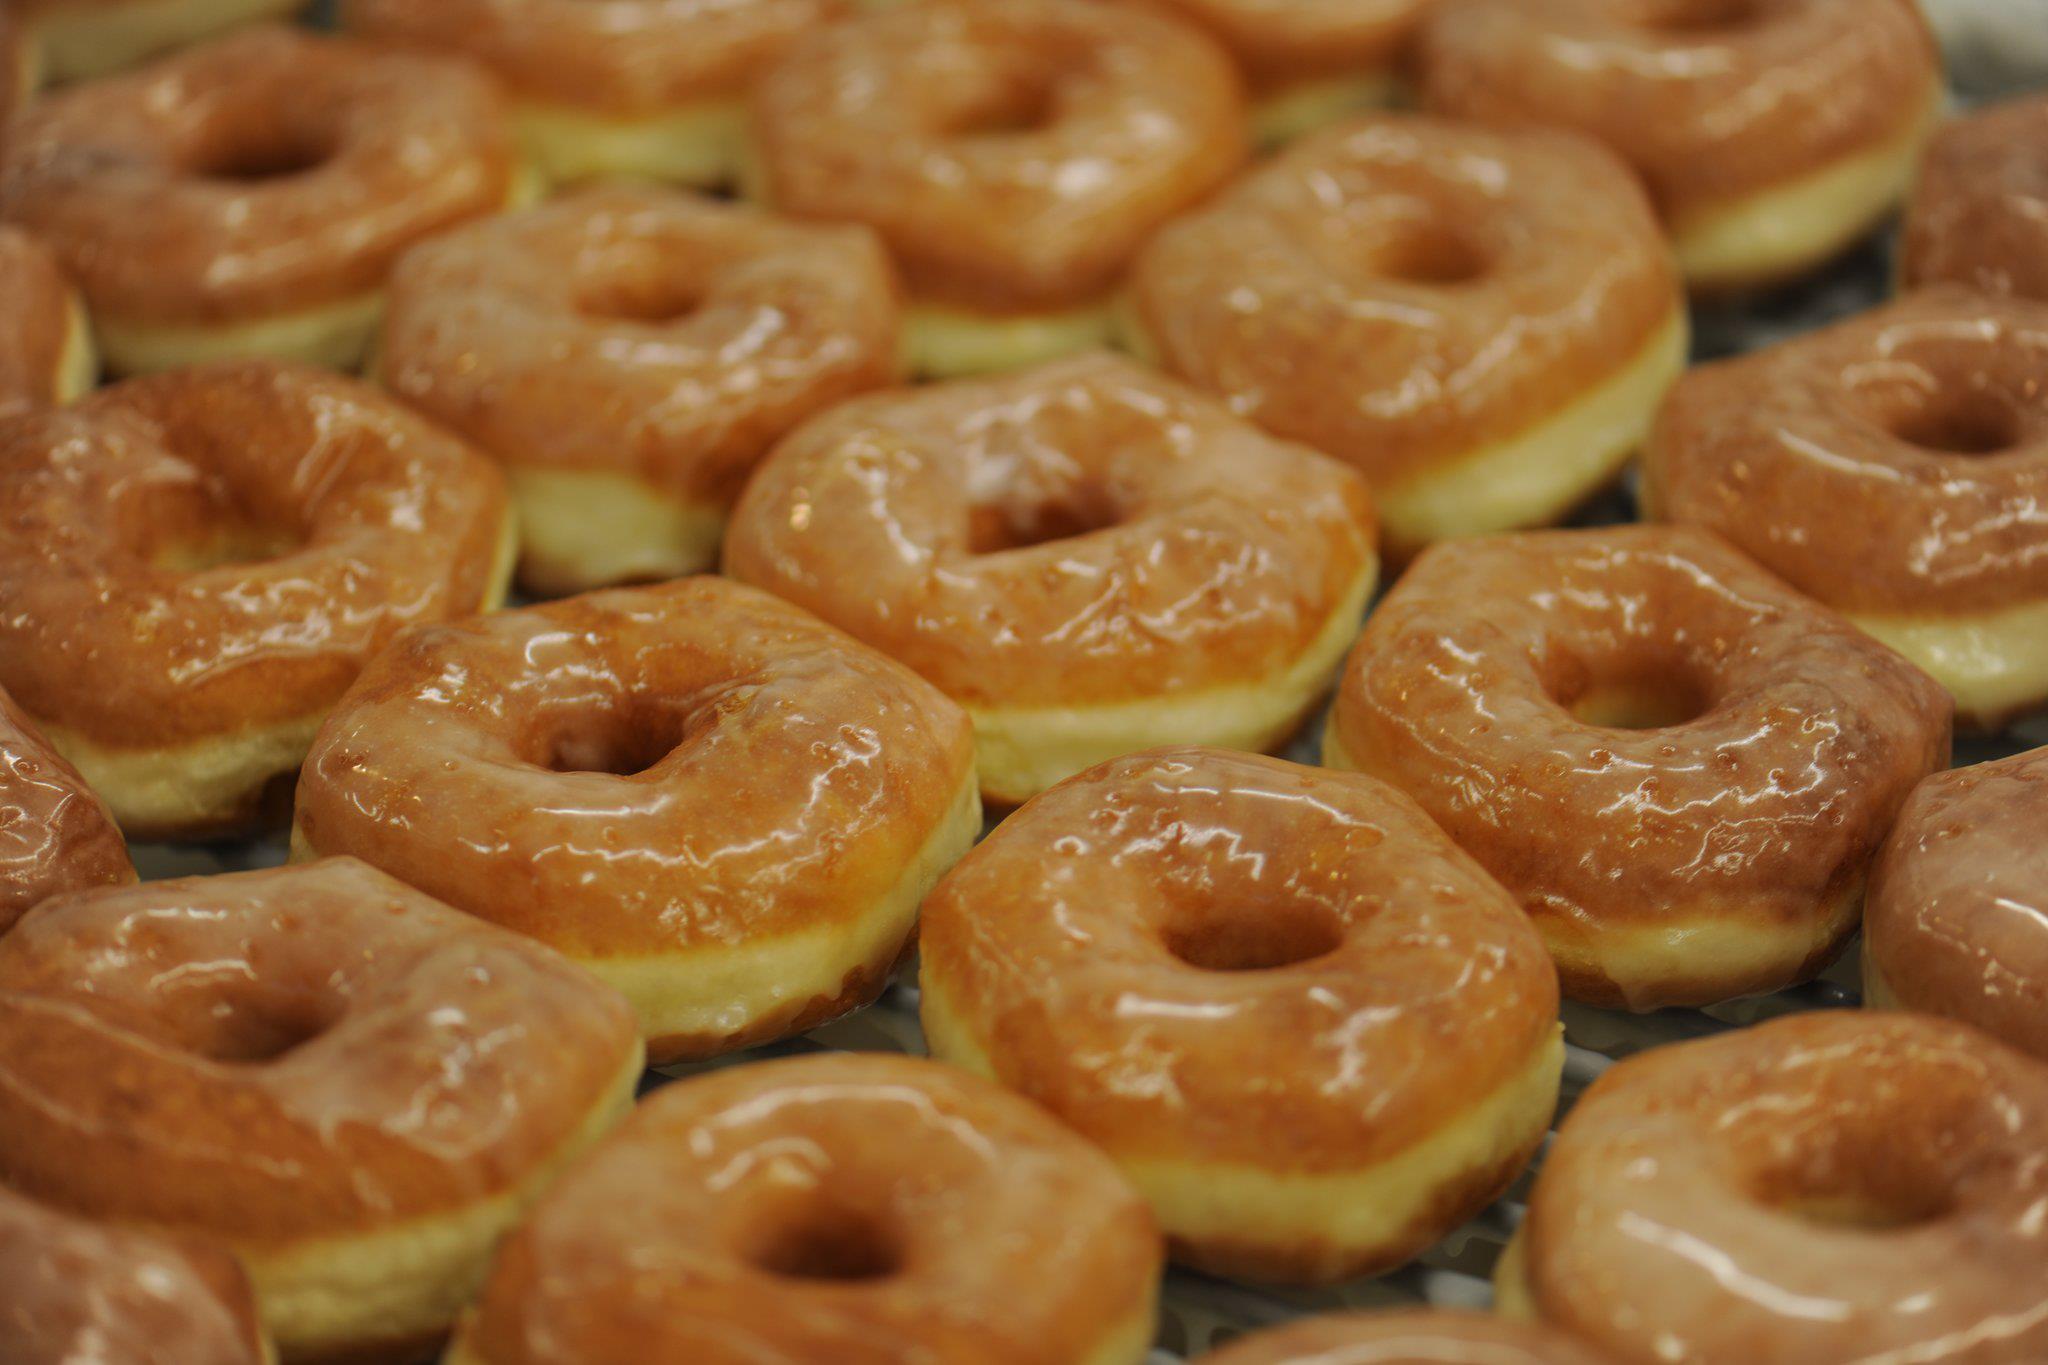 Shipley Do-Nuts to open 25 new locations in Dallas-Fort Worth